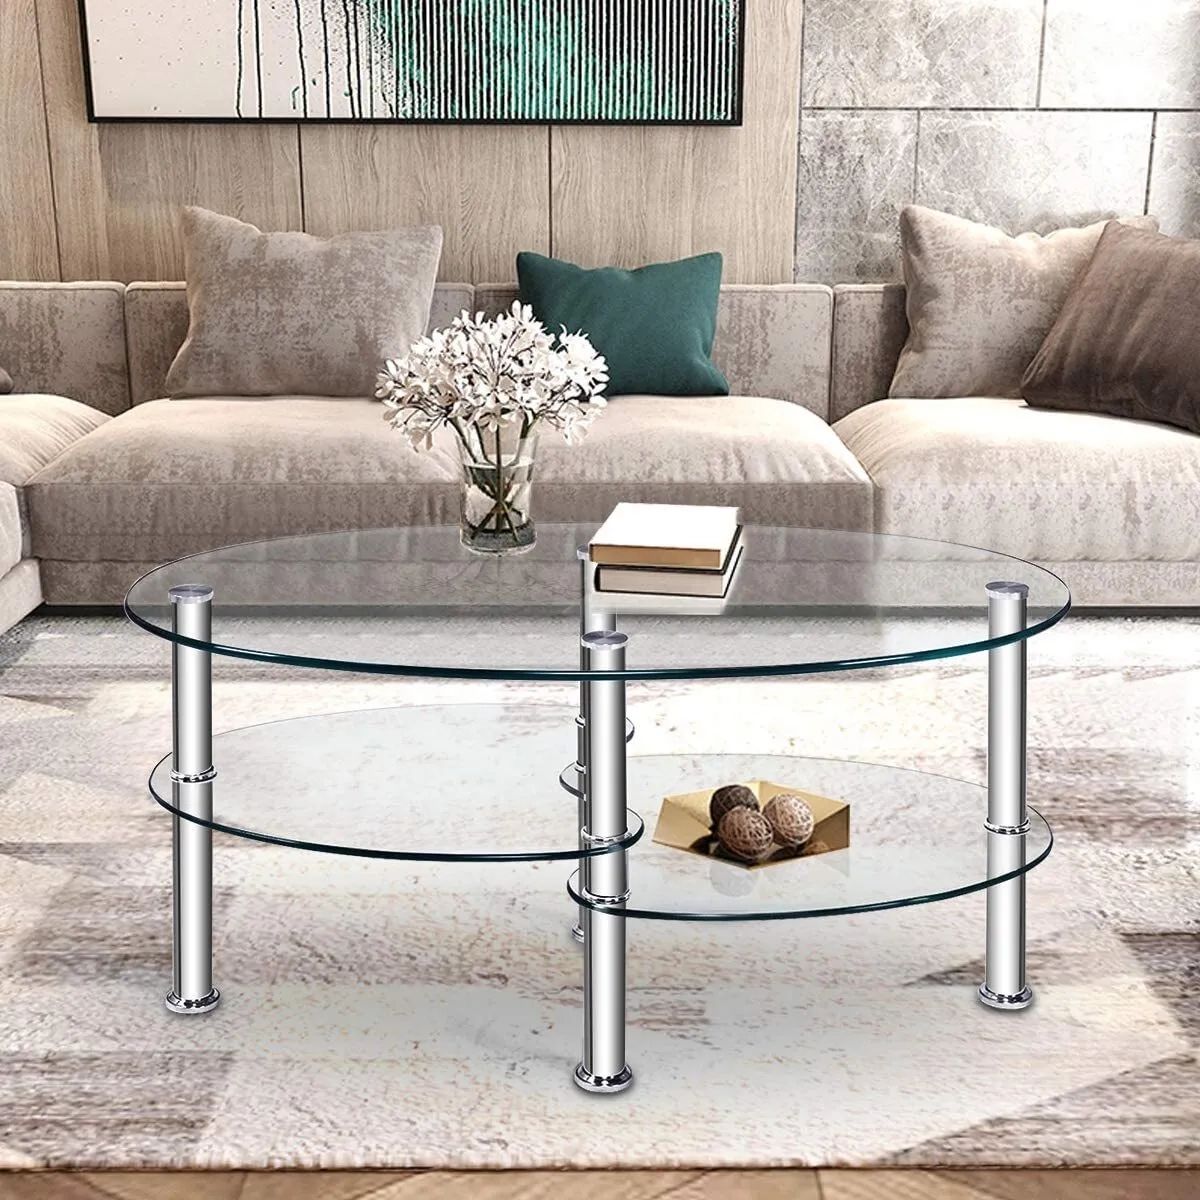 3 Tier Tempered Glass Oval Side Coffee Table Shelf Chrome Base Living Room  Home | Ebay In Tempered Glass Oval Side Tables (Photo 4 of 15)